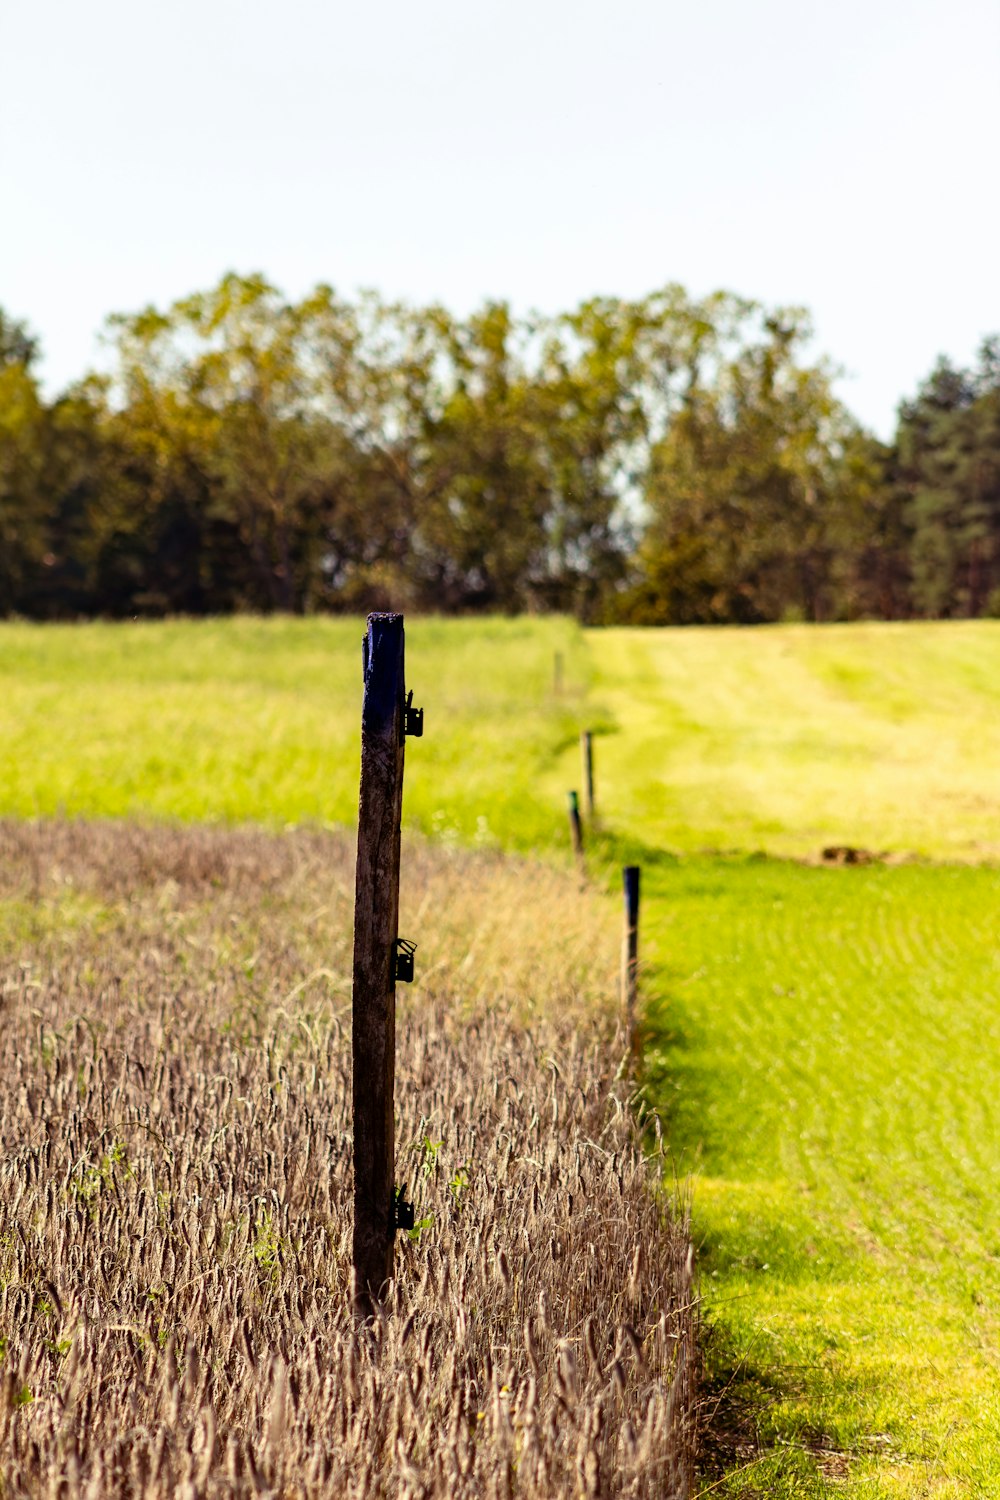 a wooden pole in a field with trees in the background